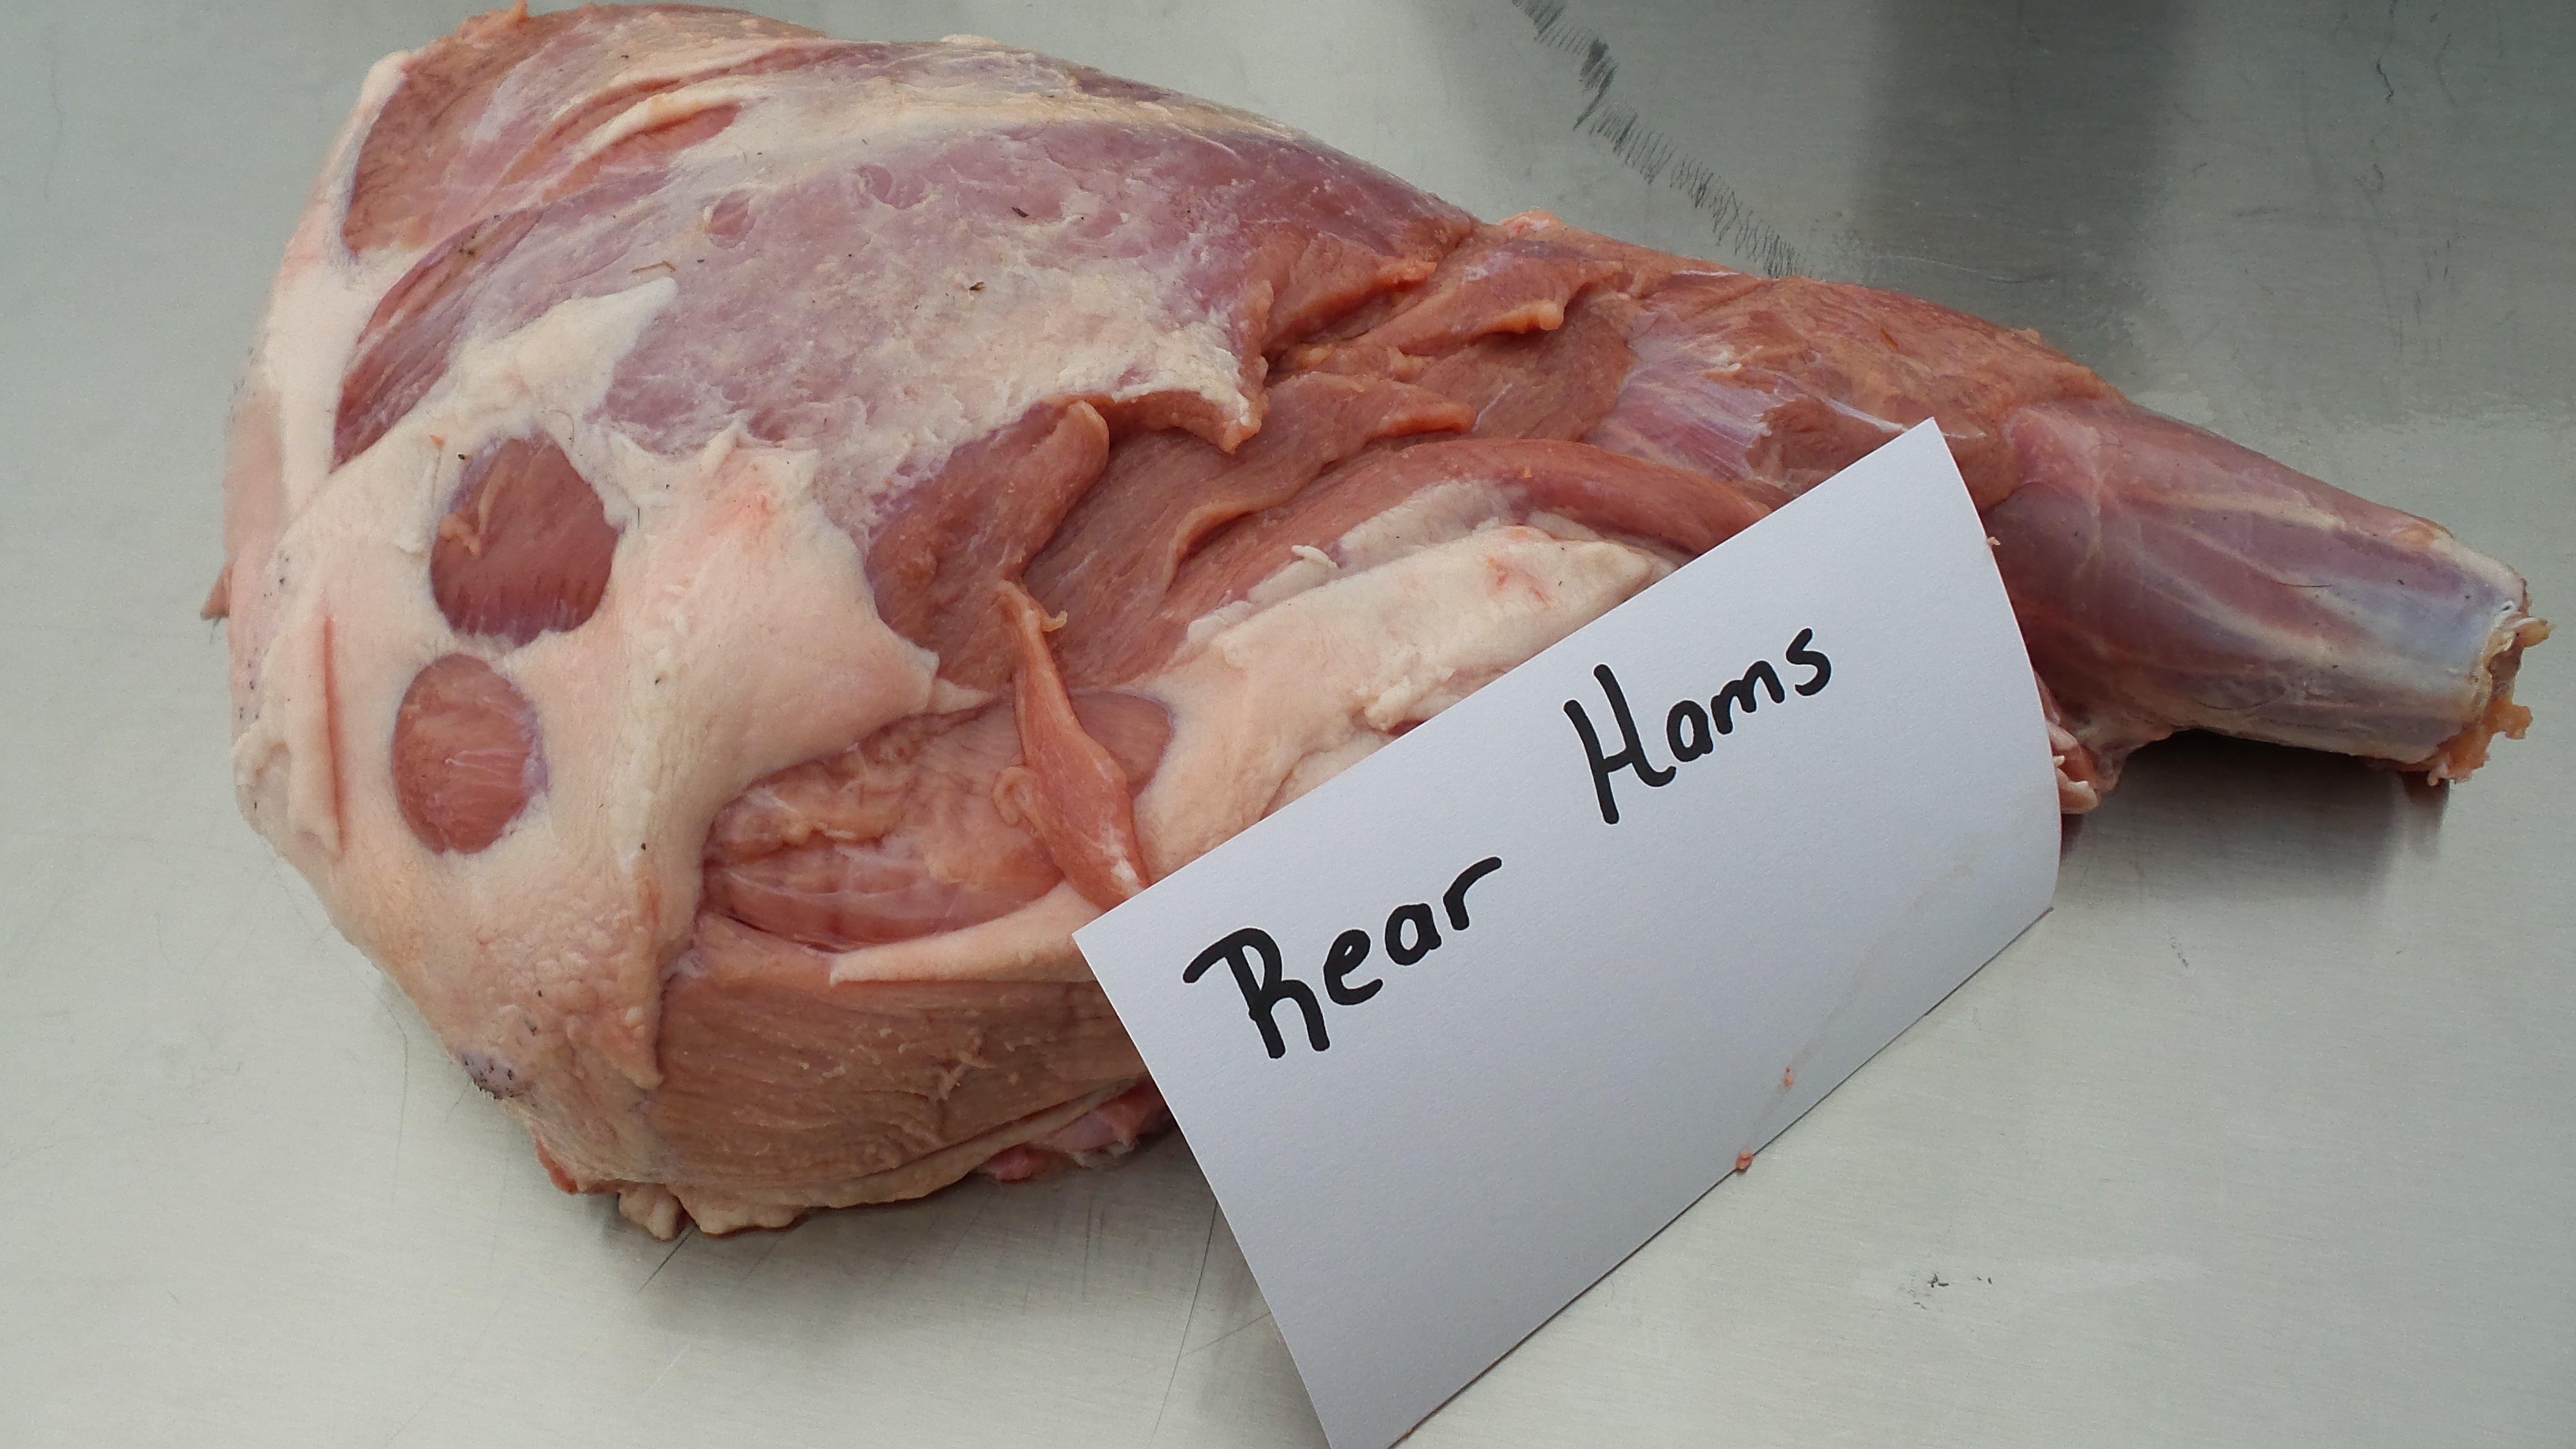 Rear hams are easily removed and separated with a meat saw.